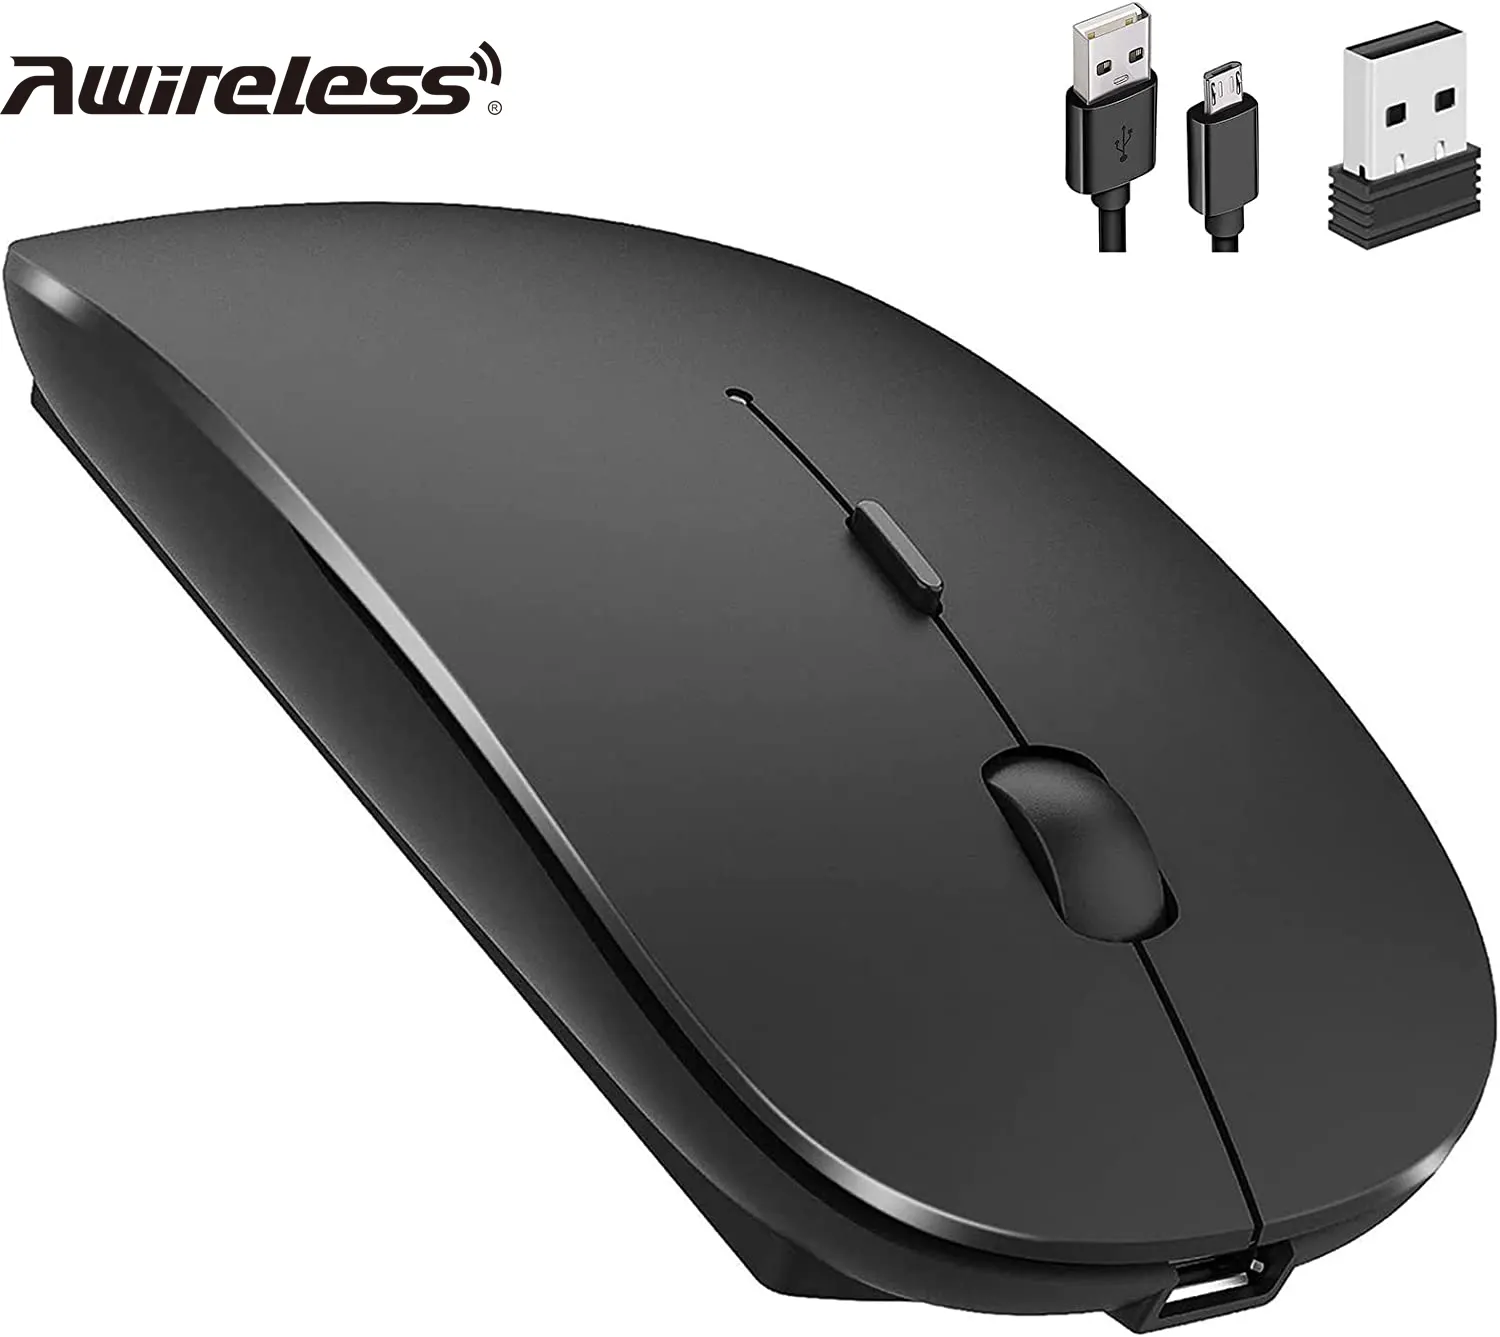 High Quality Wireless Mouse BT 2.4Ghz Rechargeable Mouse Ergonomic Wireless Mouse For Comput laptop PC Tablet